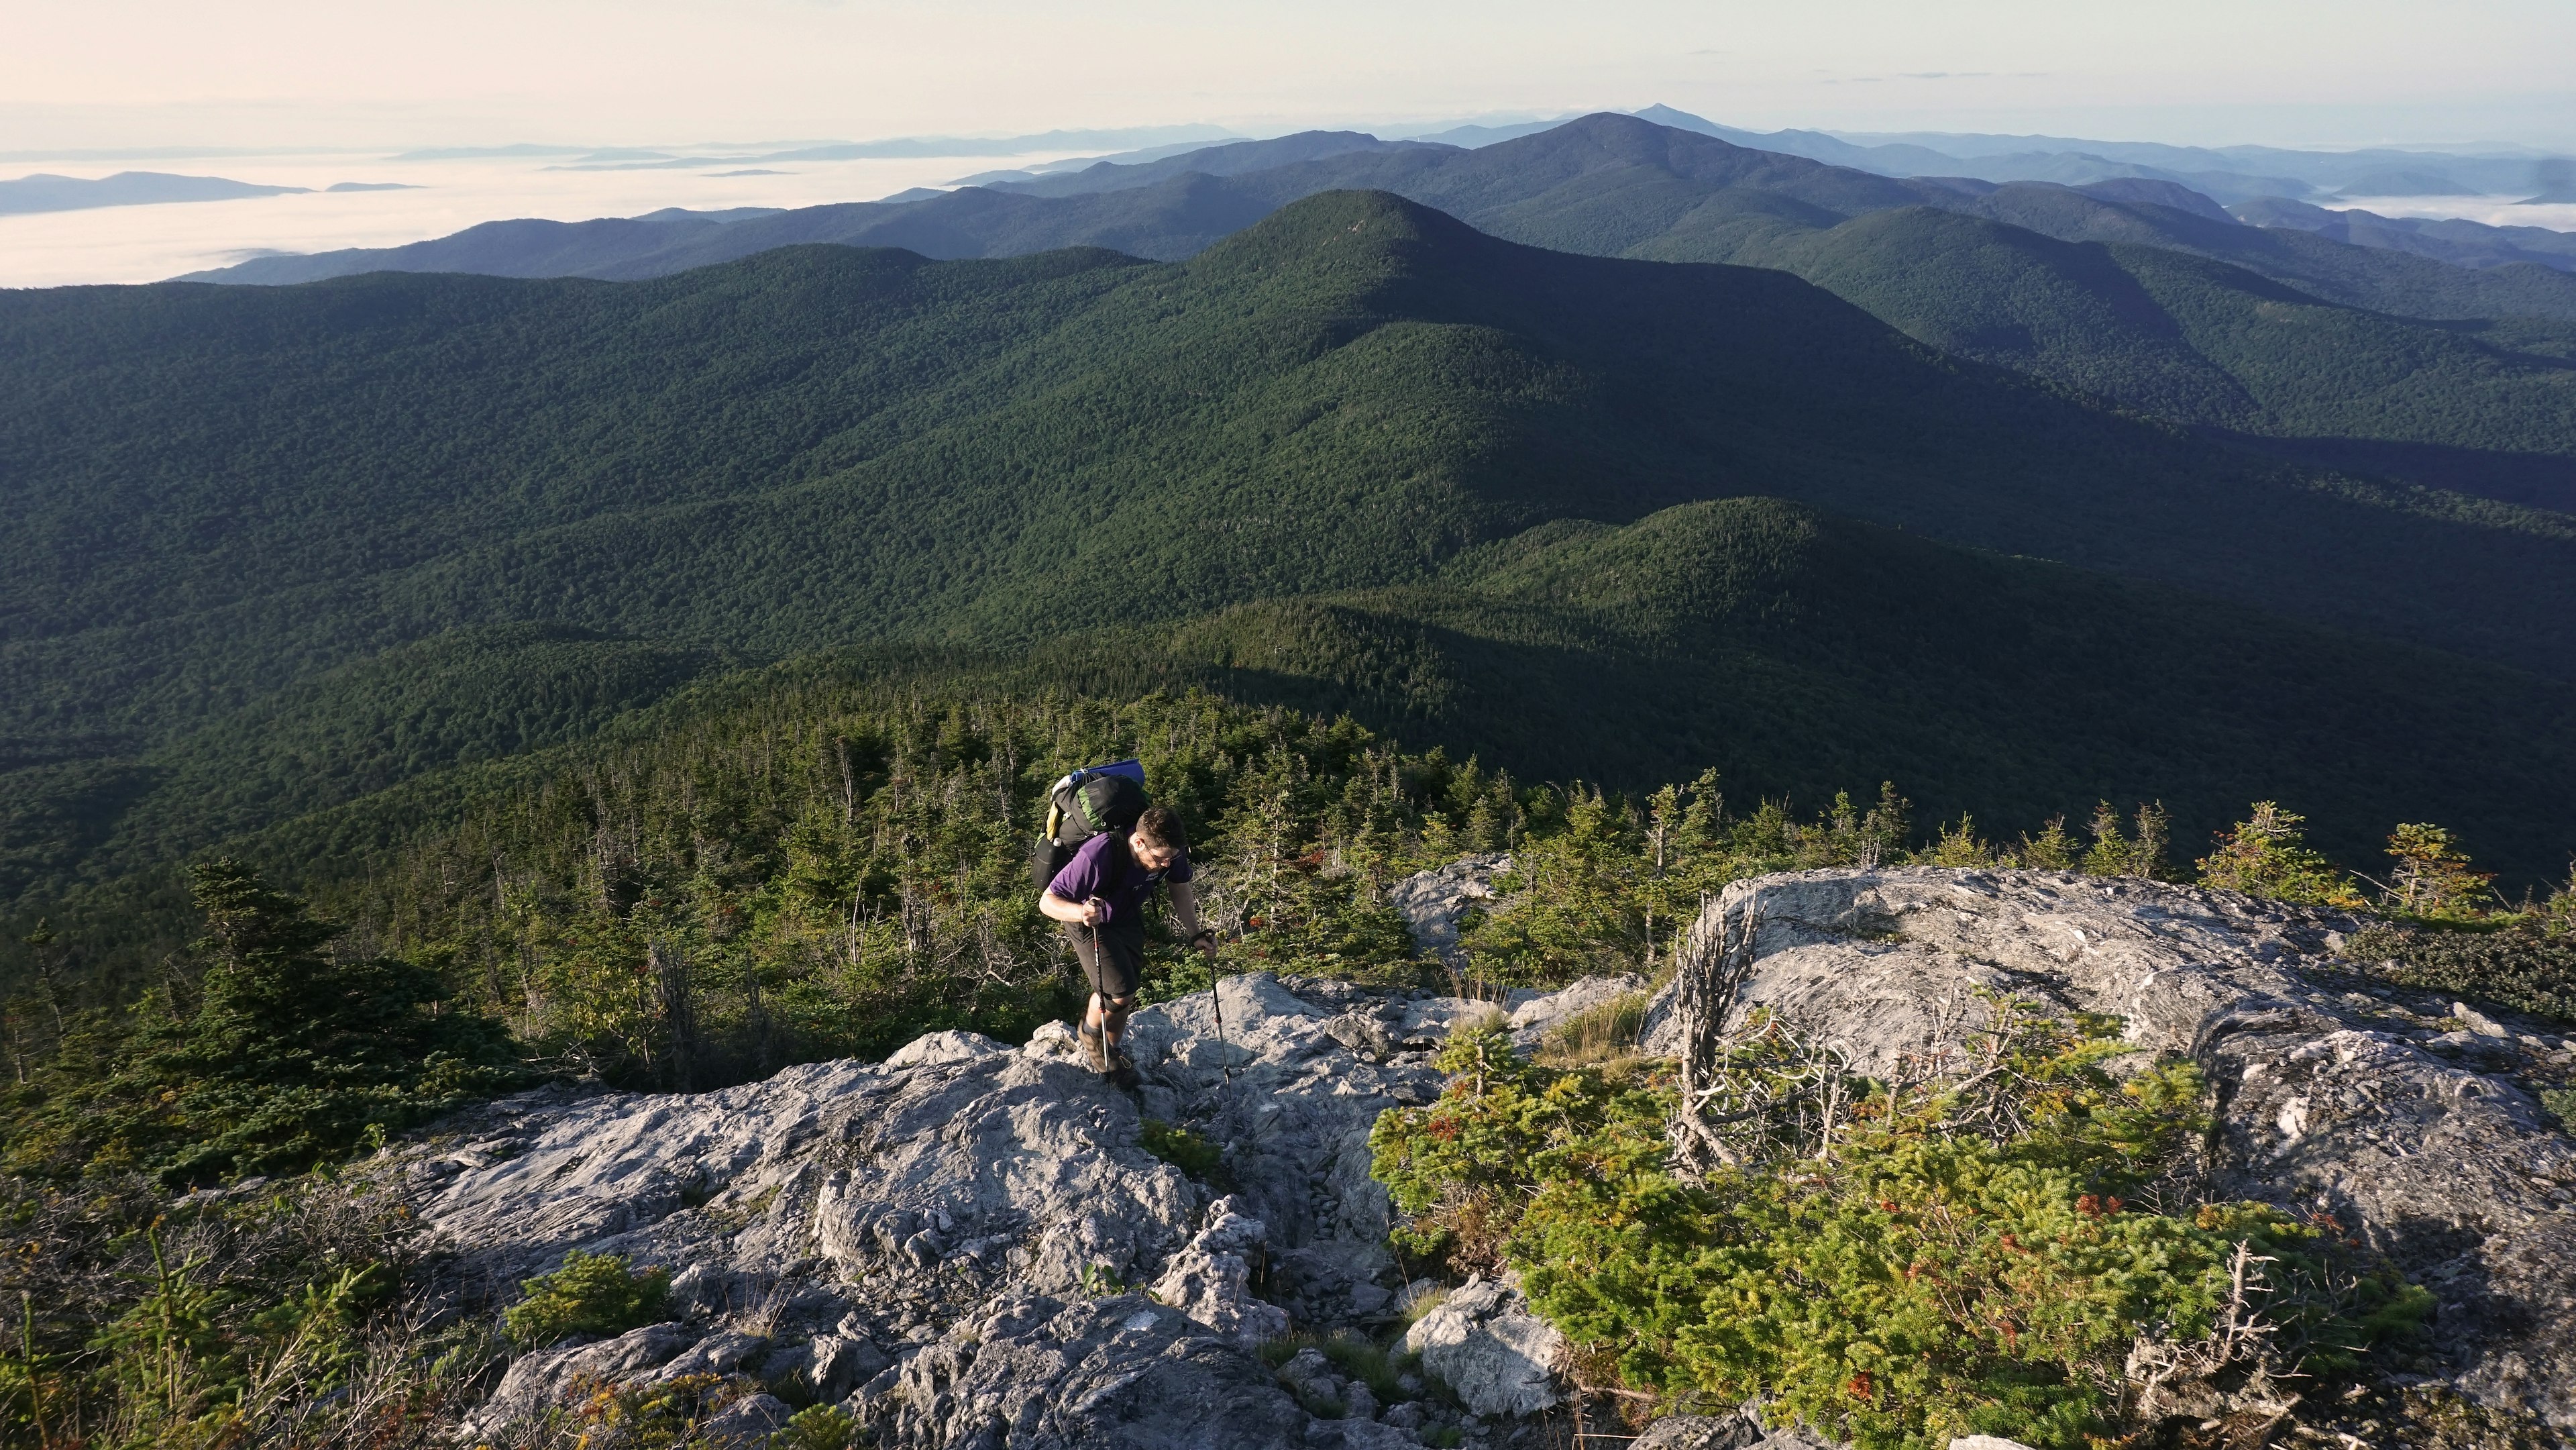 Hiking the Long Trail, Mt. Mansfield, Vermont